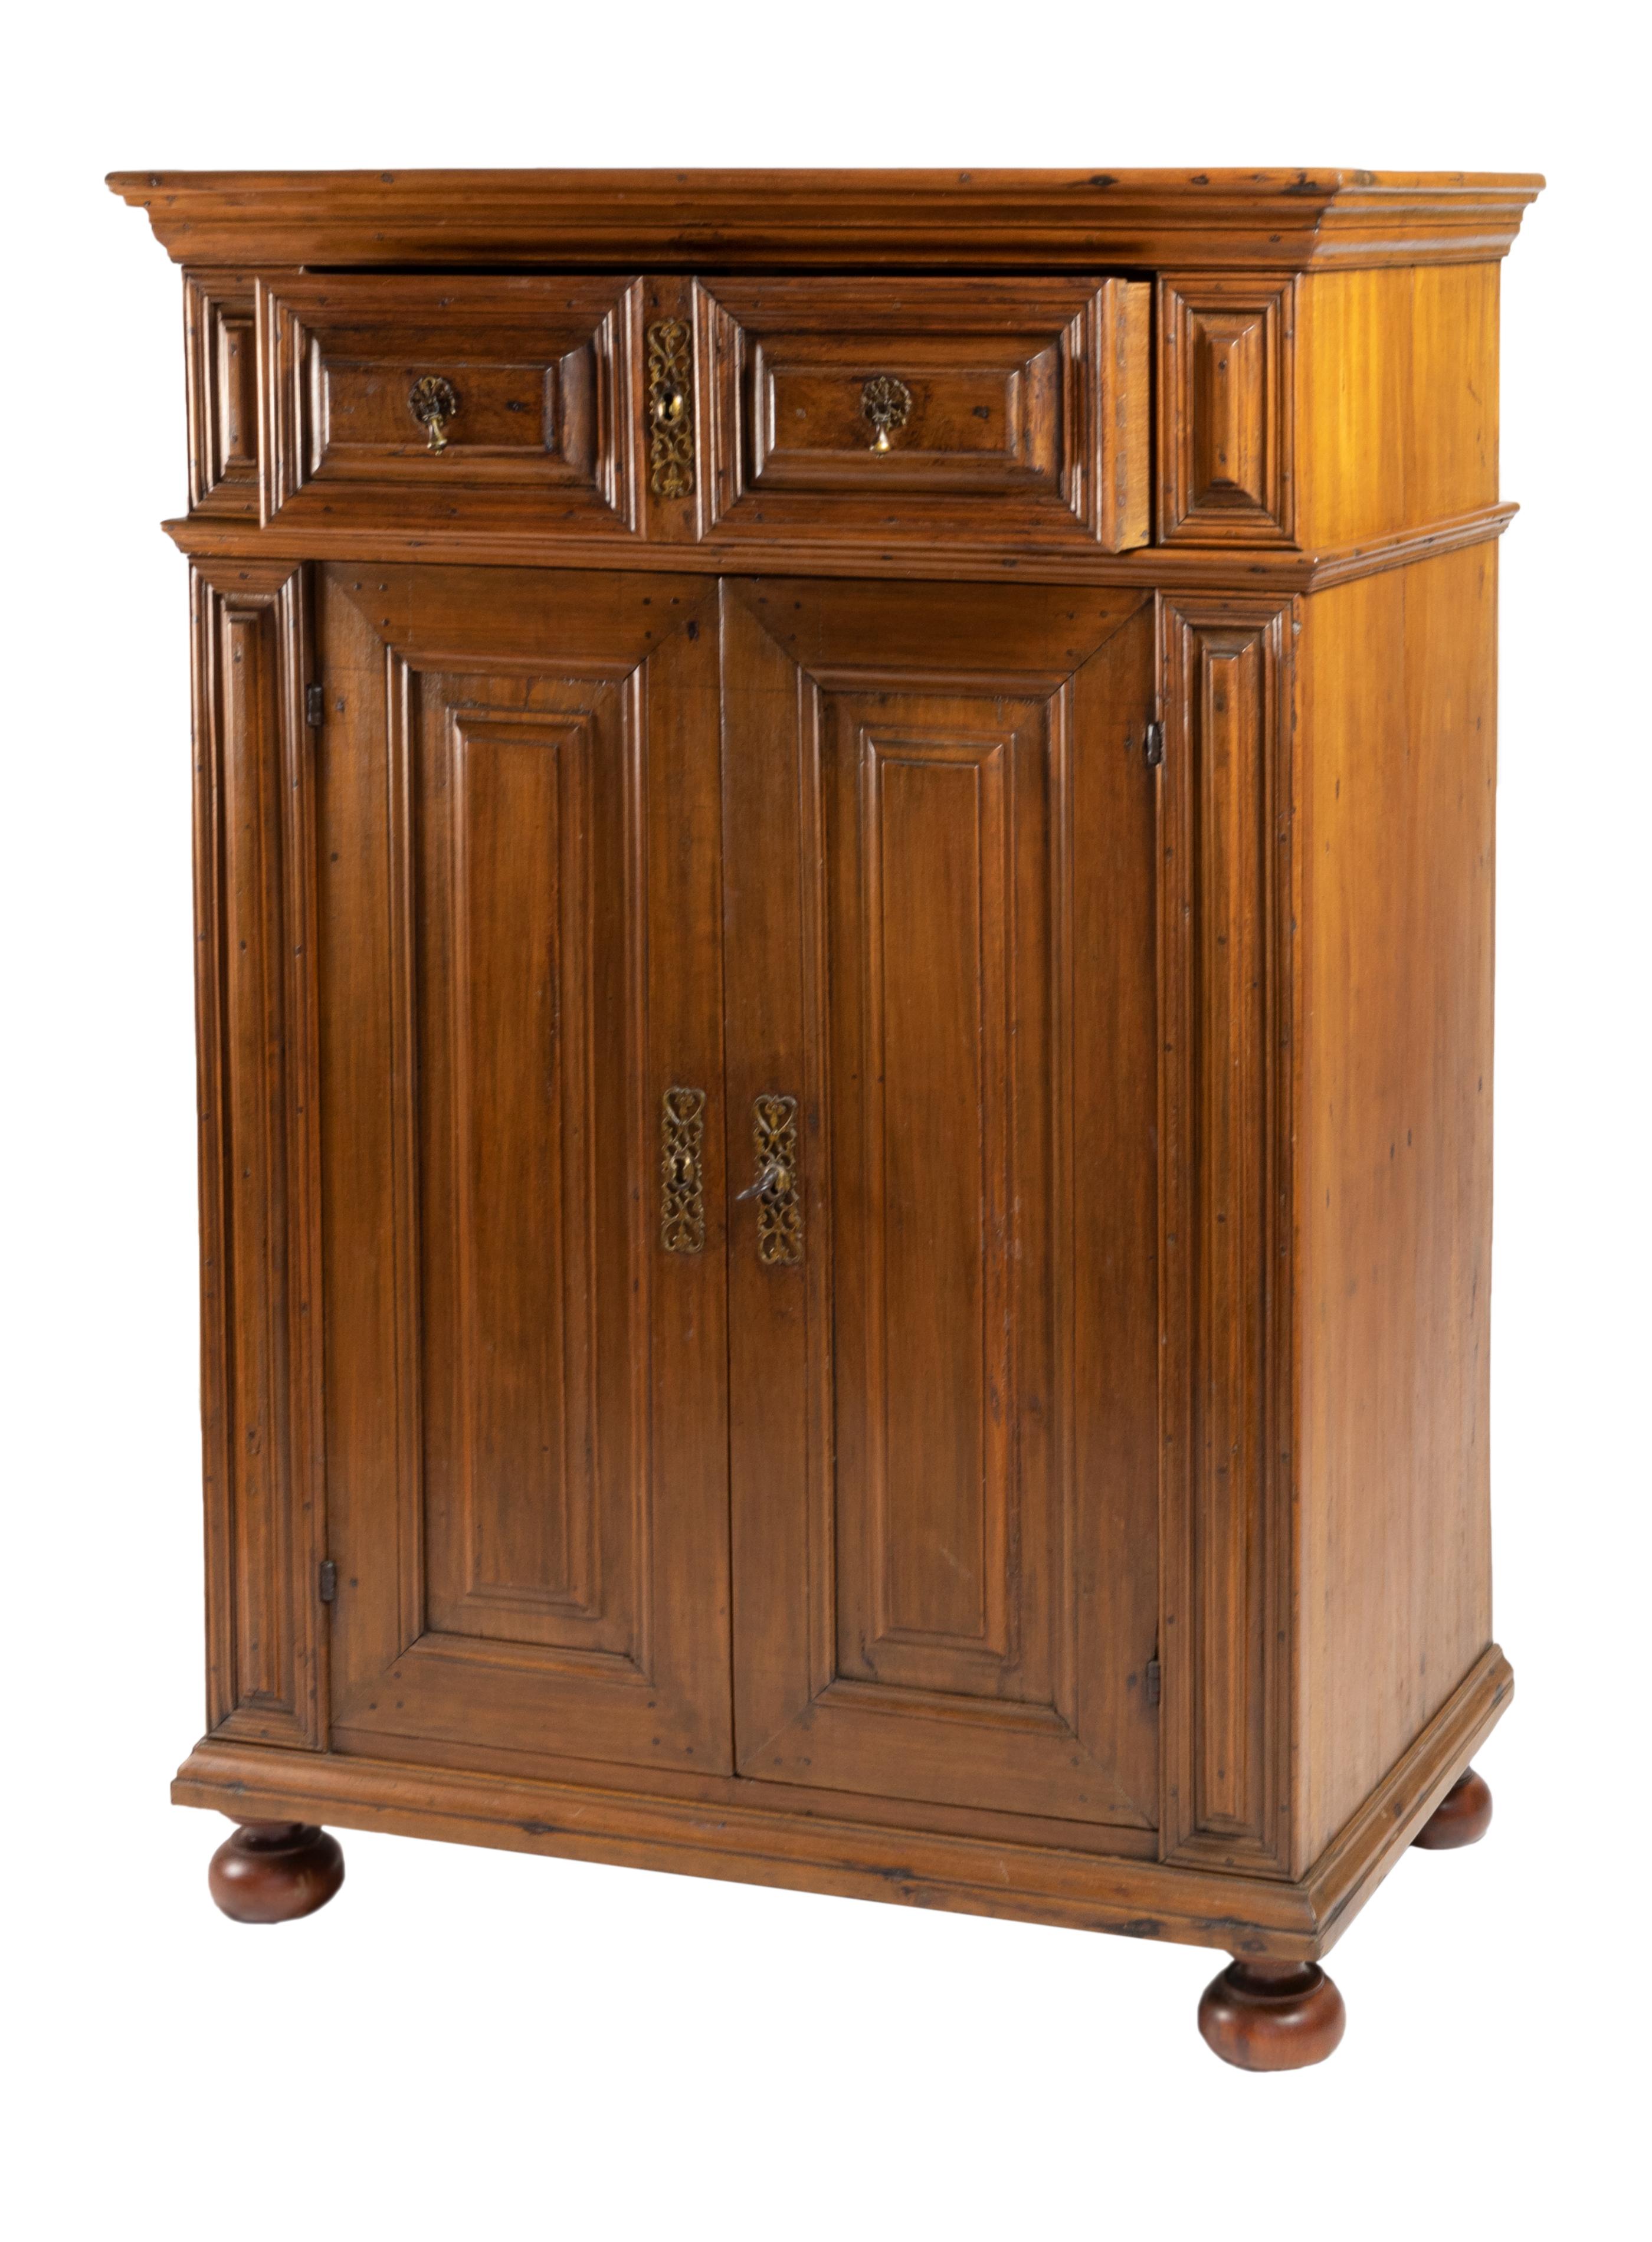 Hand-Crafted Portuguese Renaissance Cabinet, 17th Century For Sale